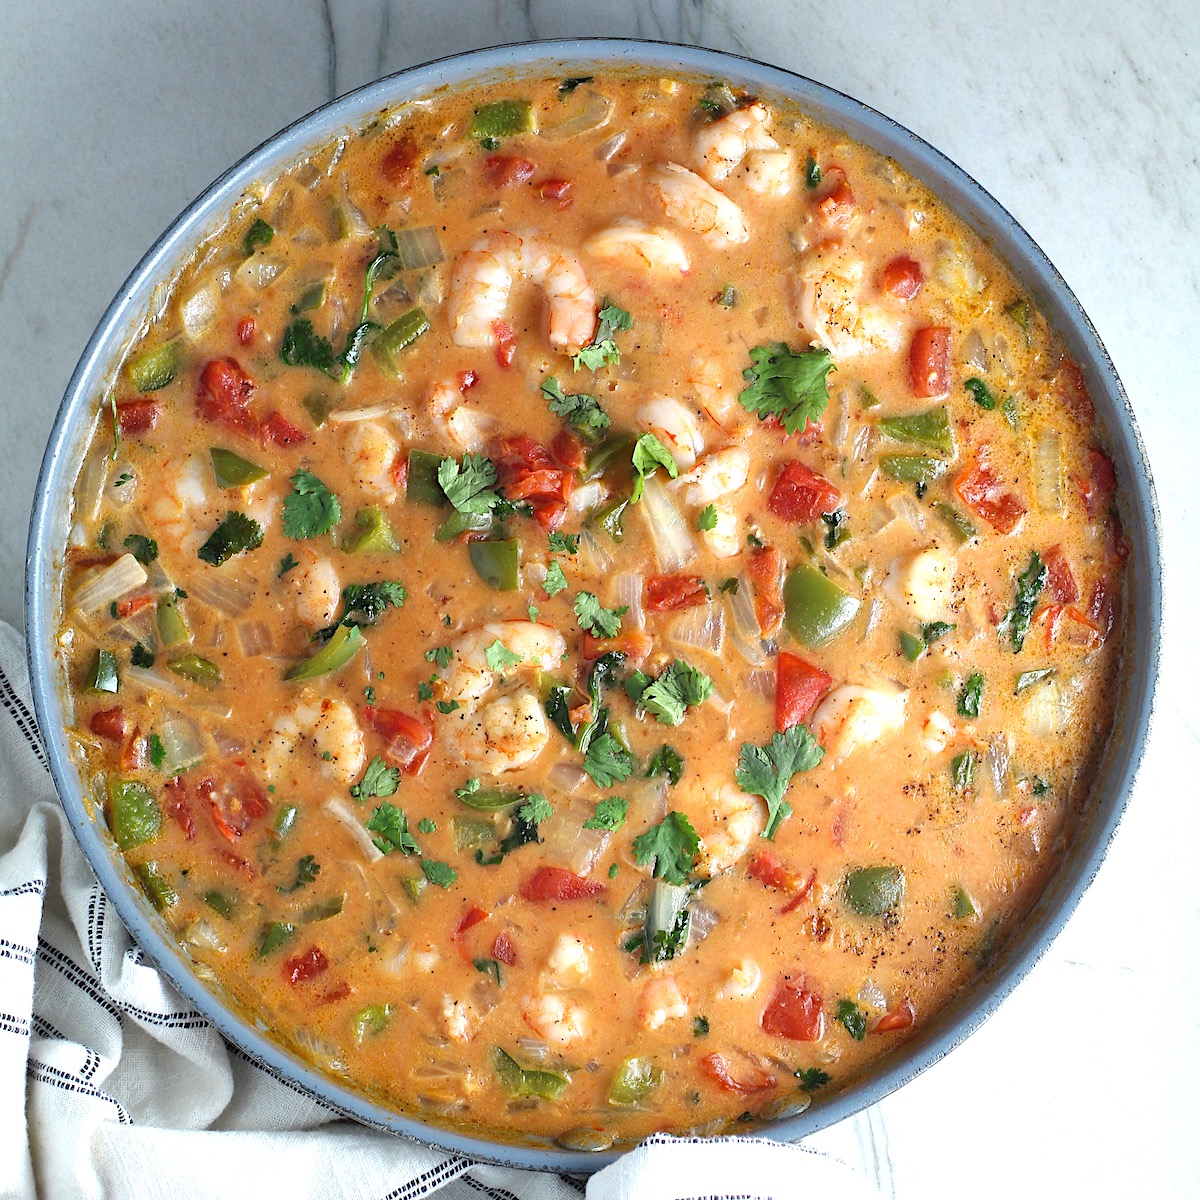 Coconut Shrimp Stew or Moqueca de Camarão, in a pan on counter. It's a delicious traditional dish in Brazil. It's a creamy stew with coconut milk and vegetables.